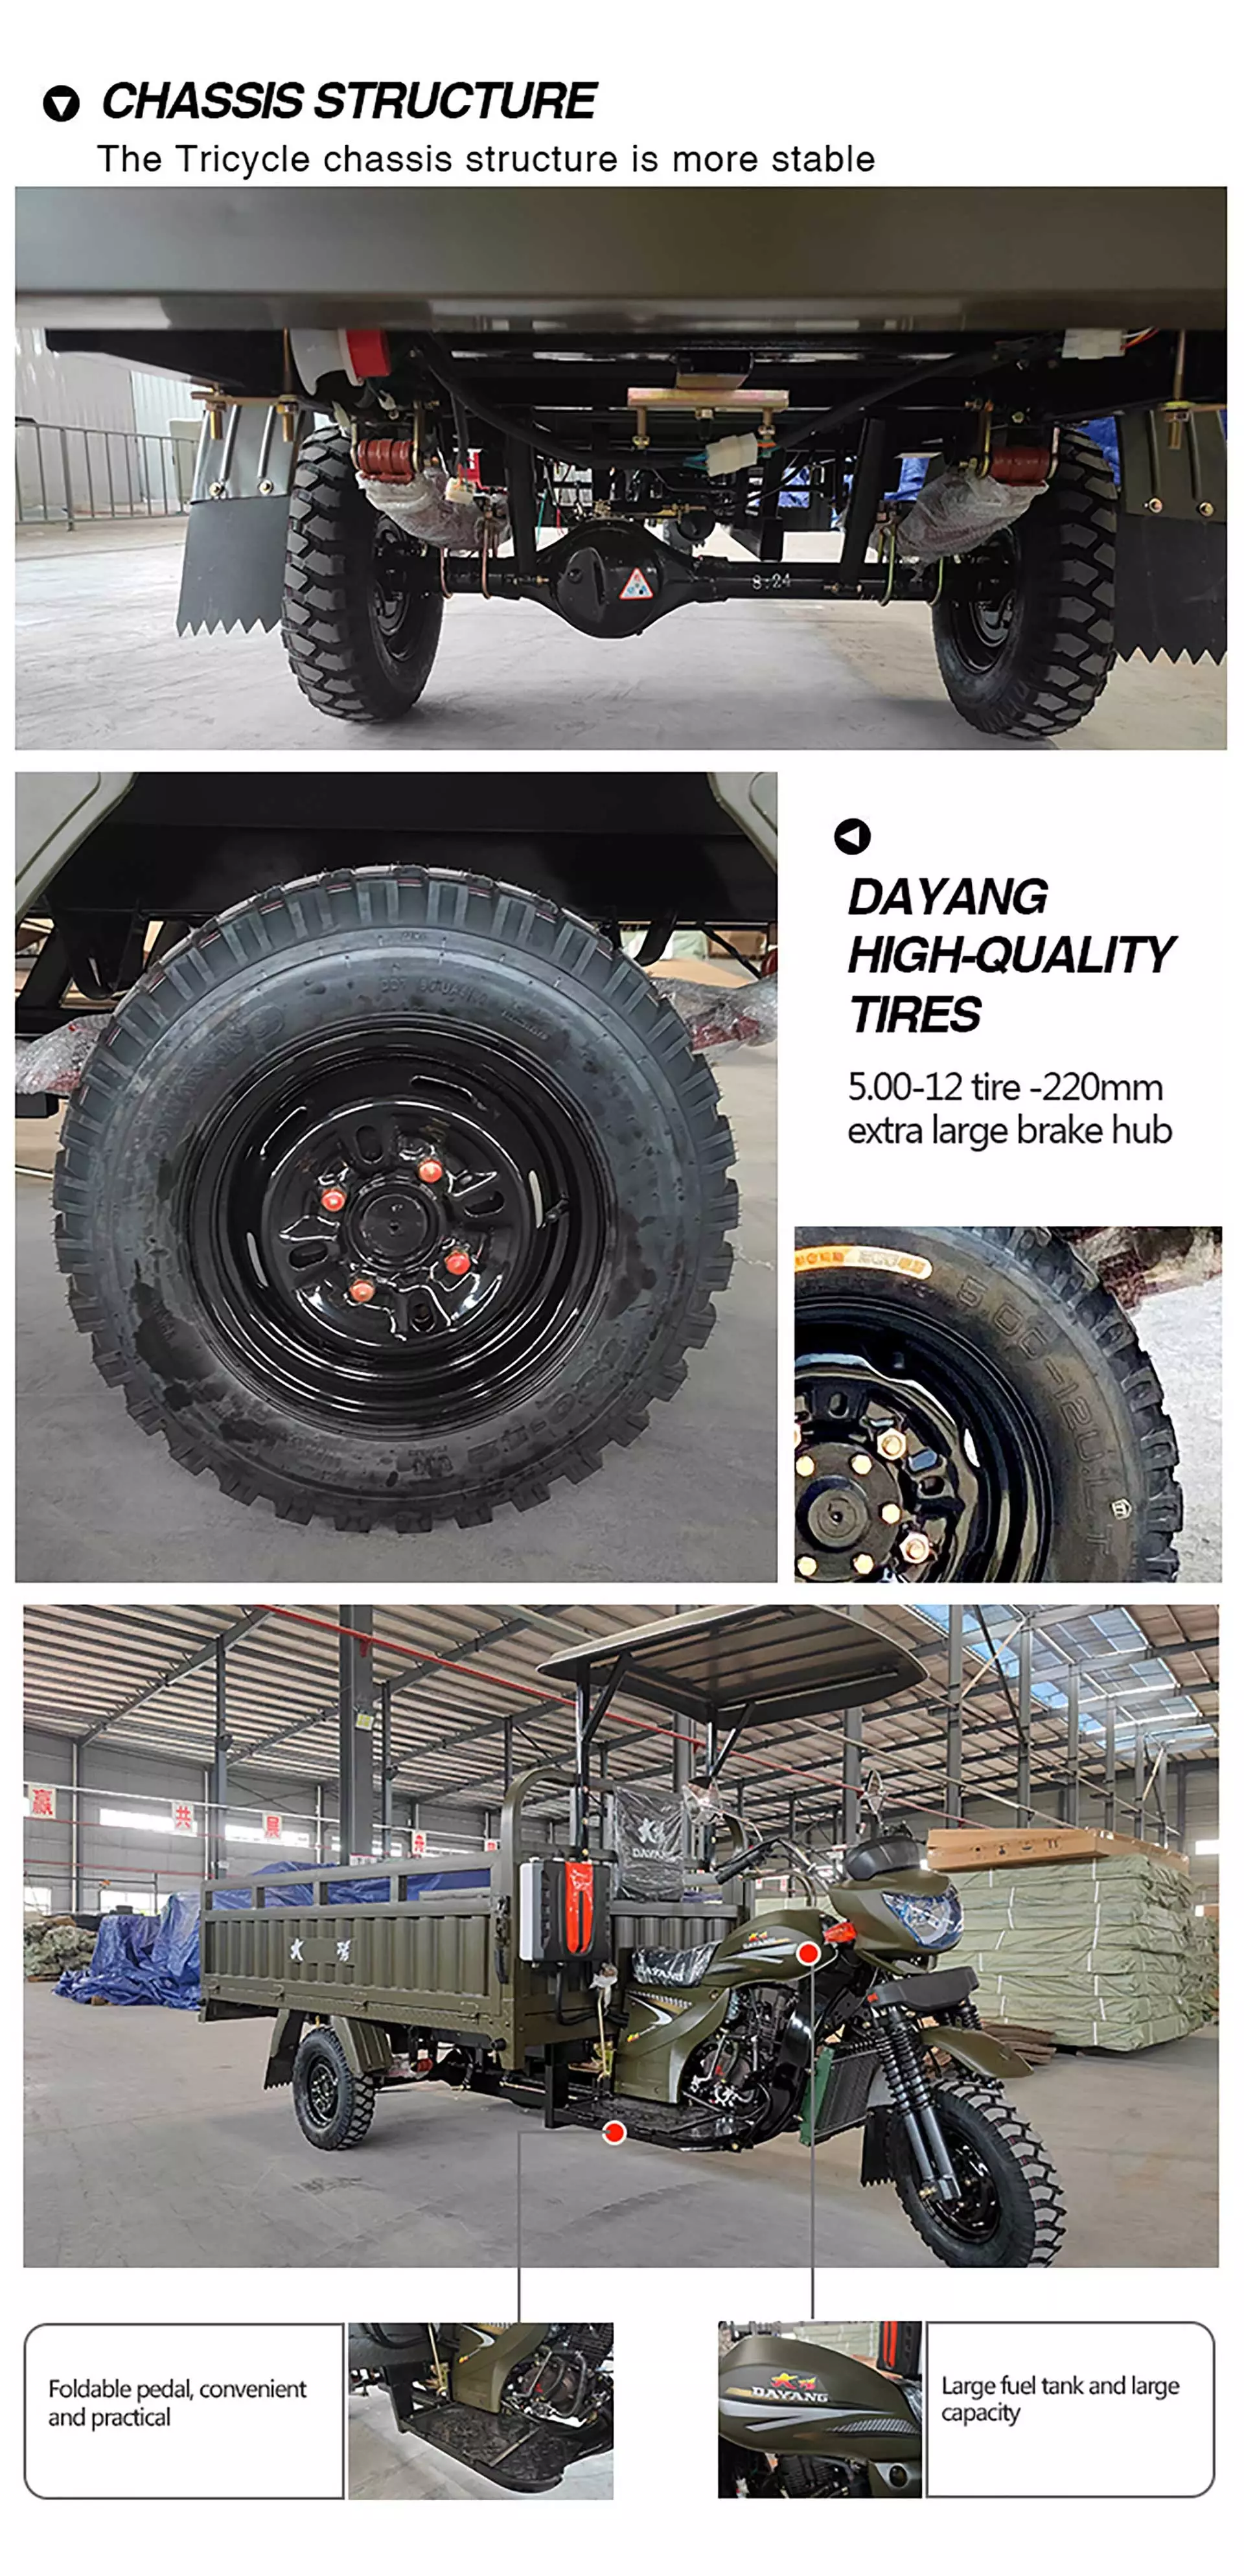 Made in china strong climbing ability Petrol chinese zambia motor tricycle 250cc dayangmotorized adult tricycles